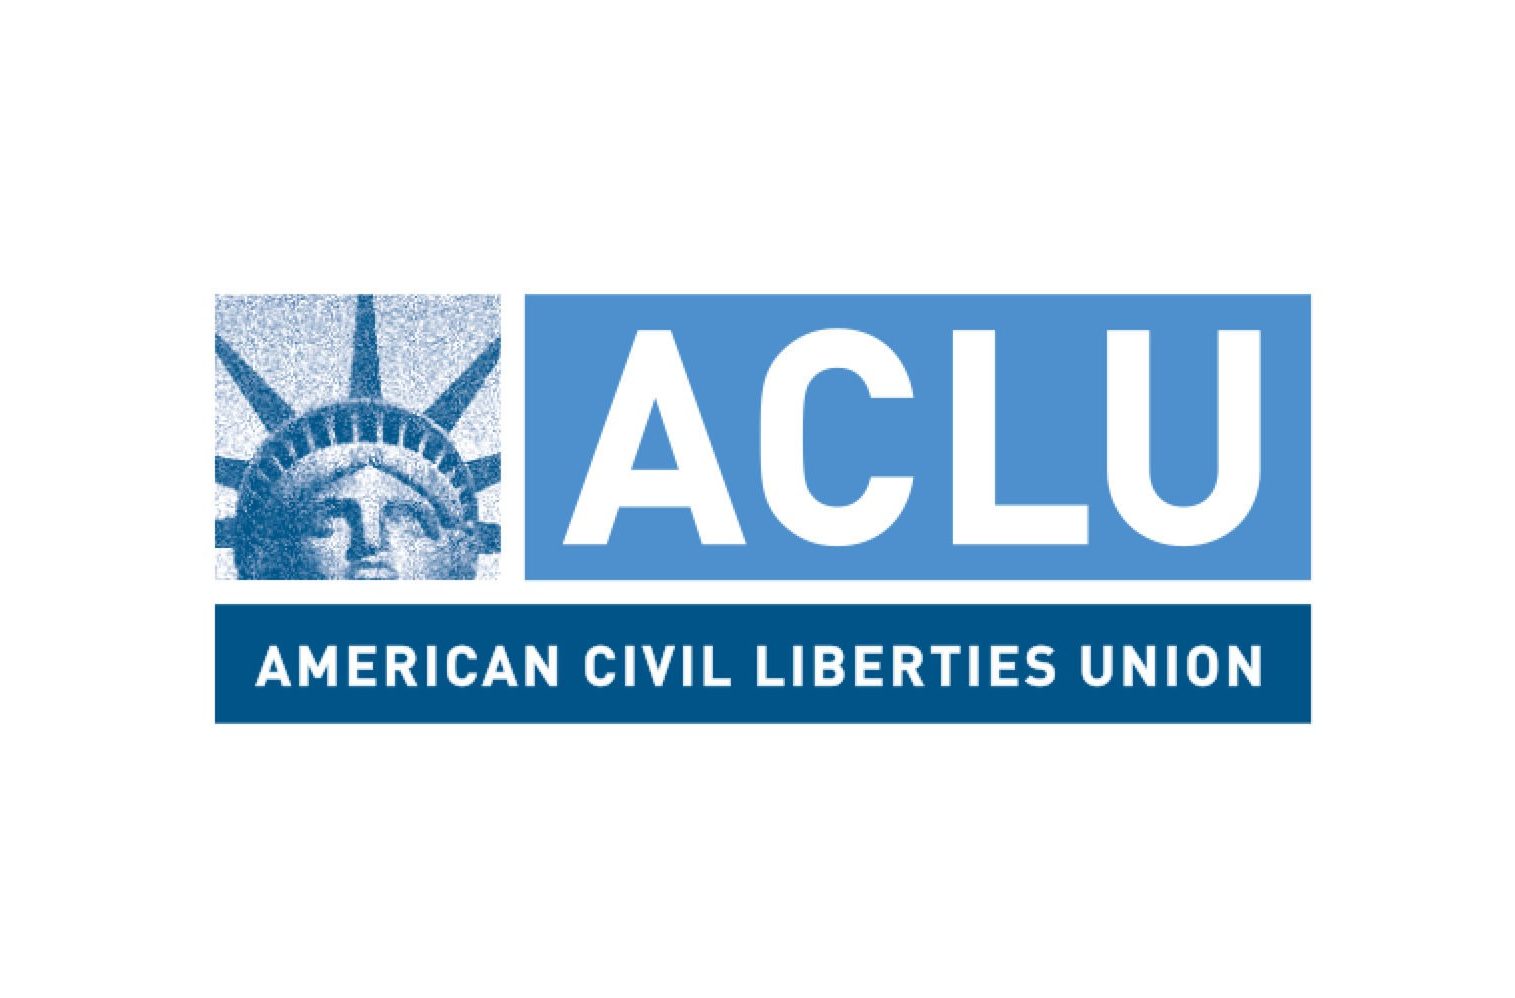 Thank you from American Civil Liberties Union